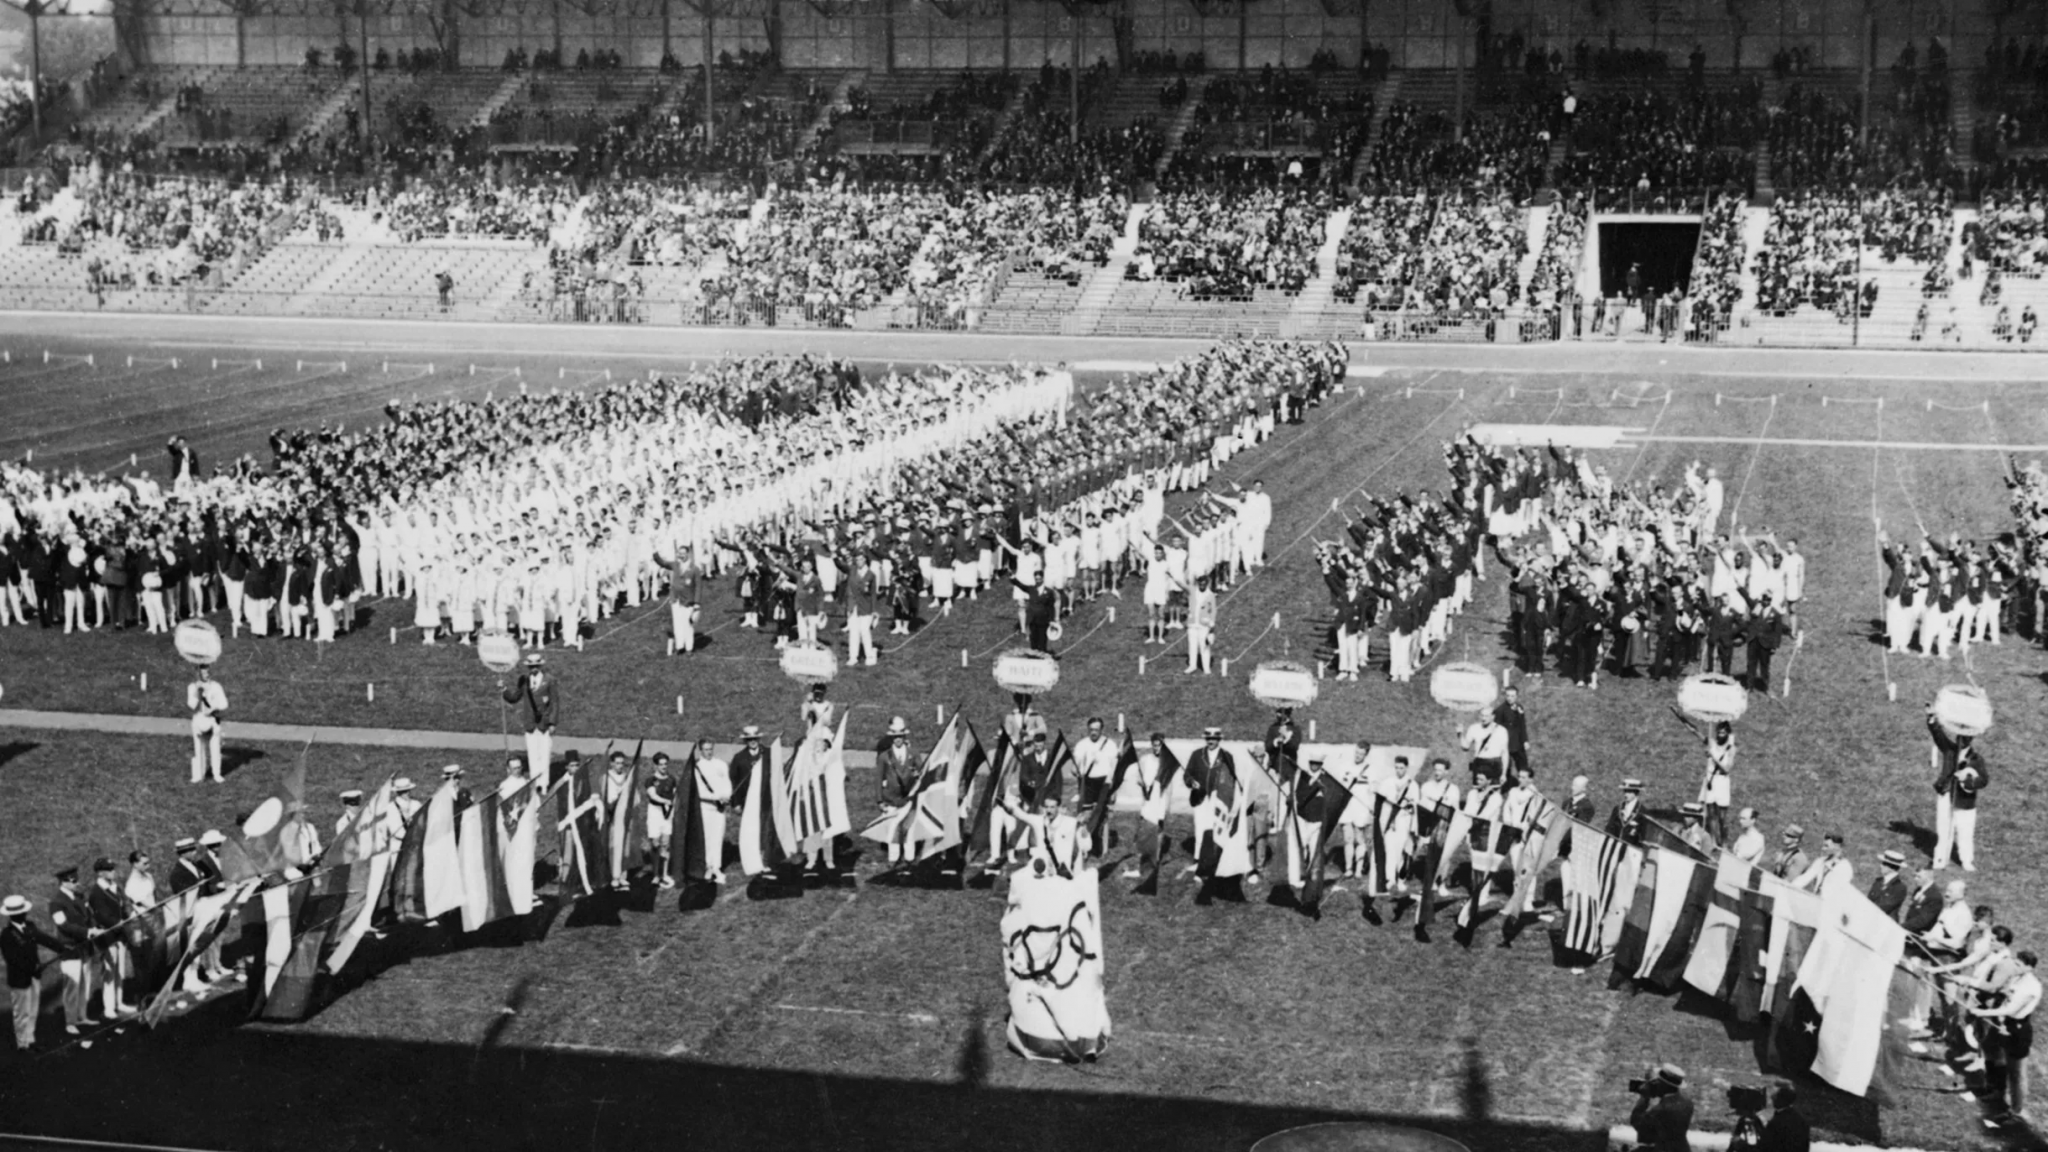 After the horrors of the Great War, there was a lot of anticipation about what role sport could play in helping countries come closer together at Paris 1924 ©Getty Images